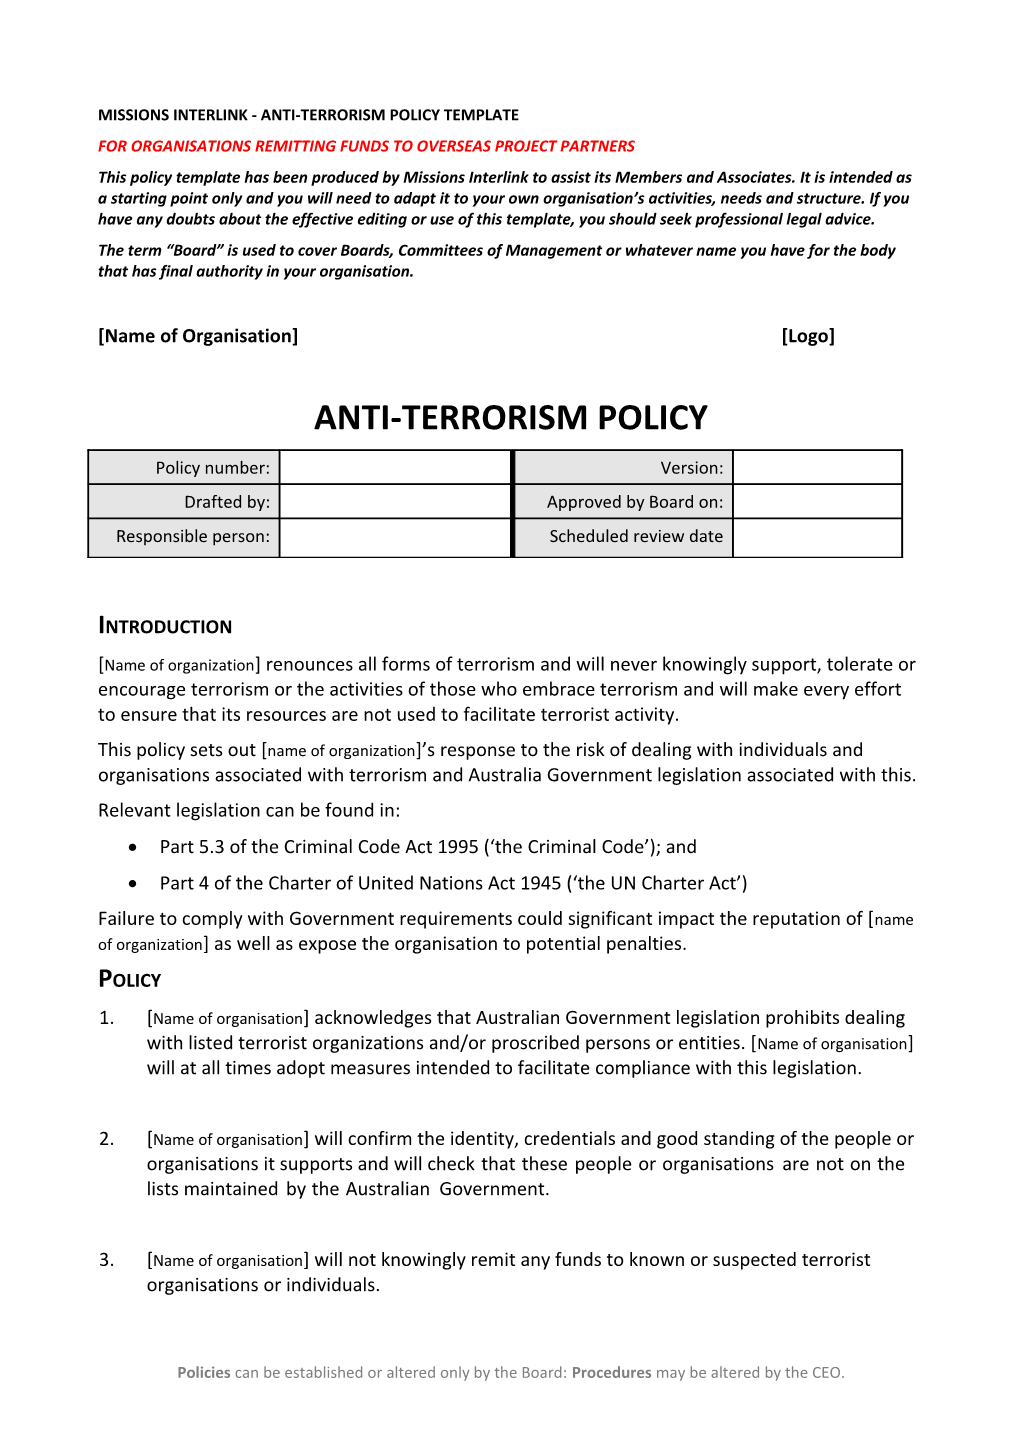 Missions Interlink - Anti-Terrorism Policy Template